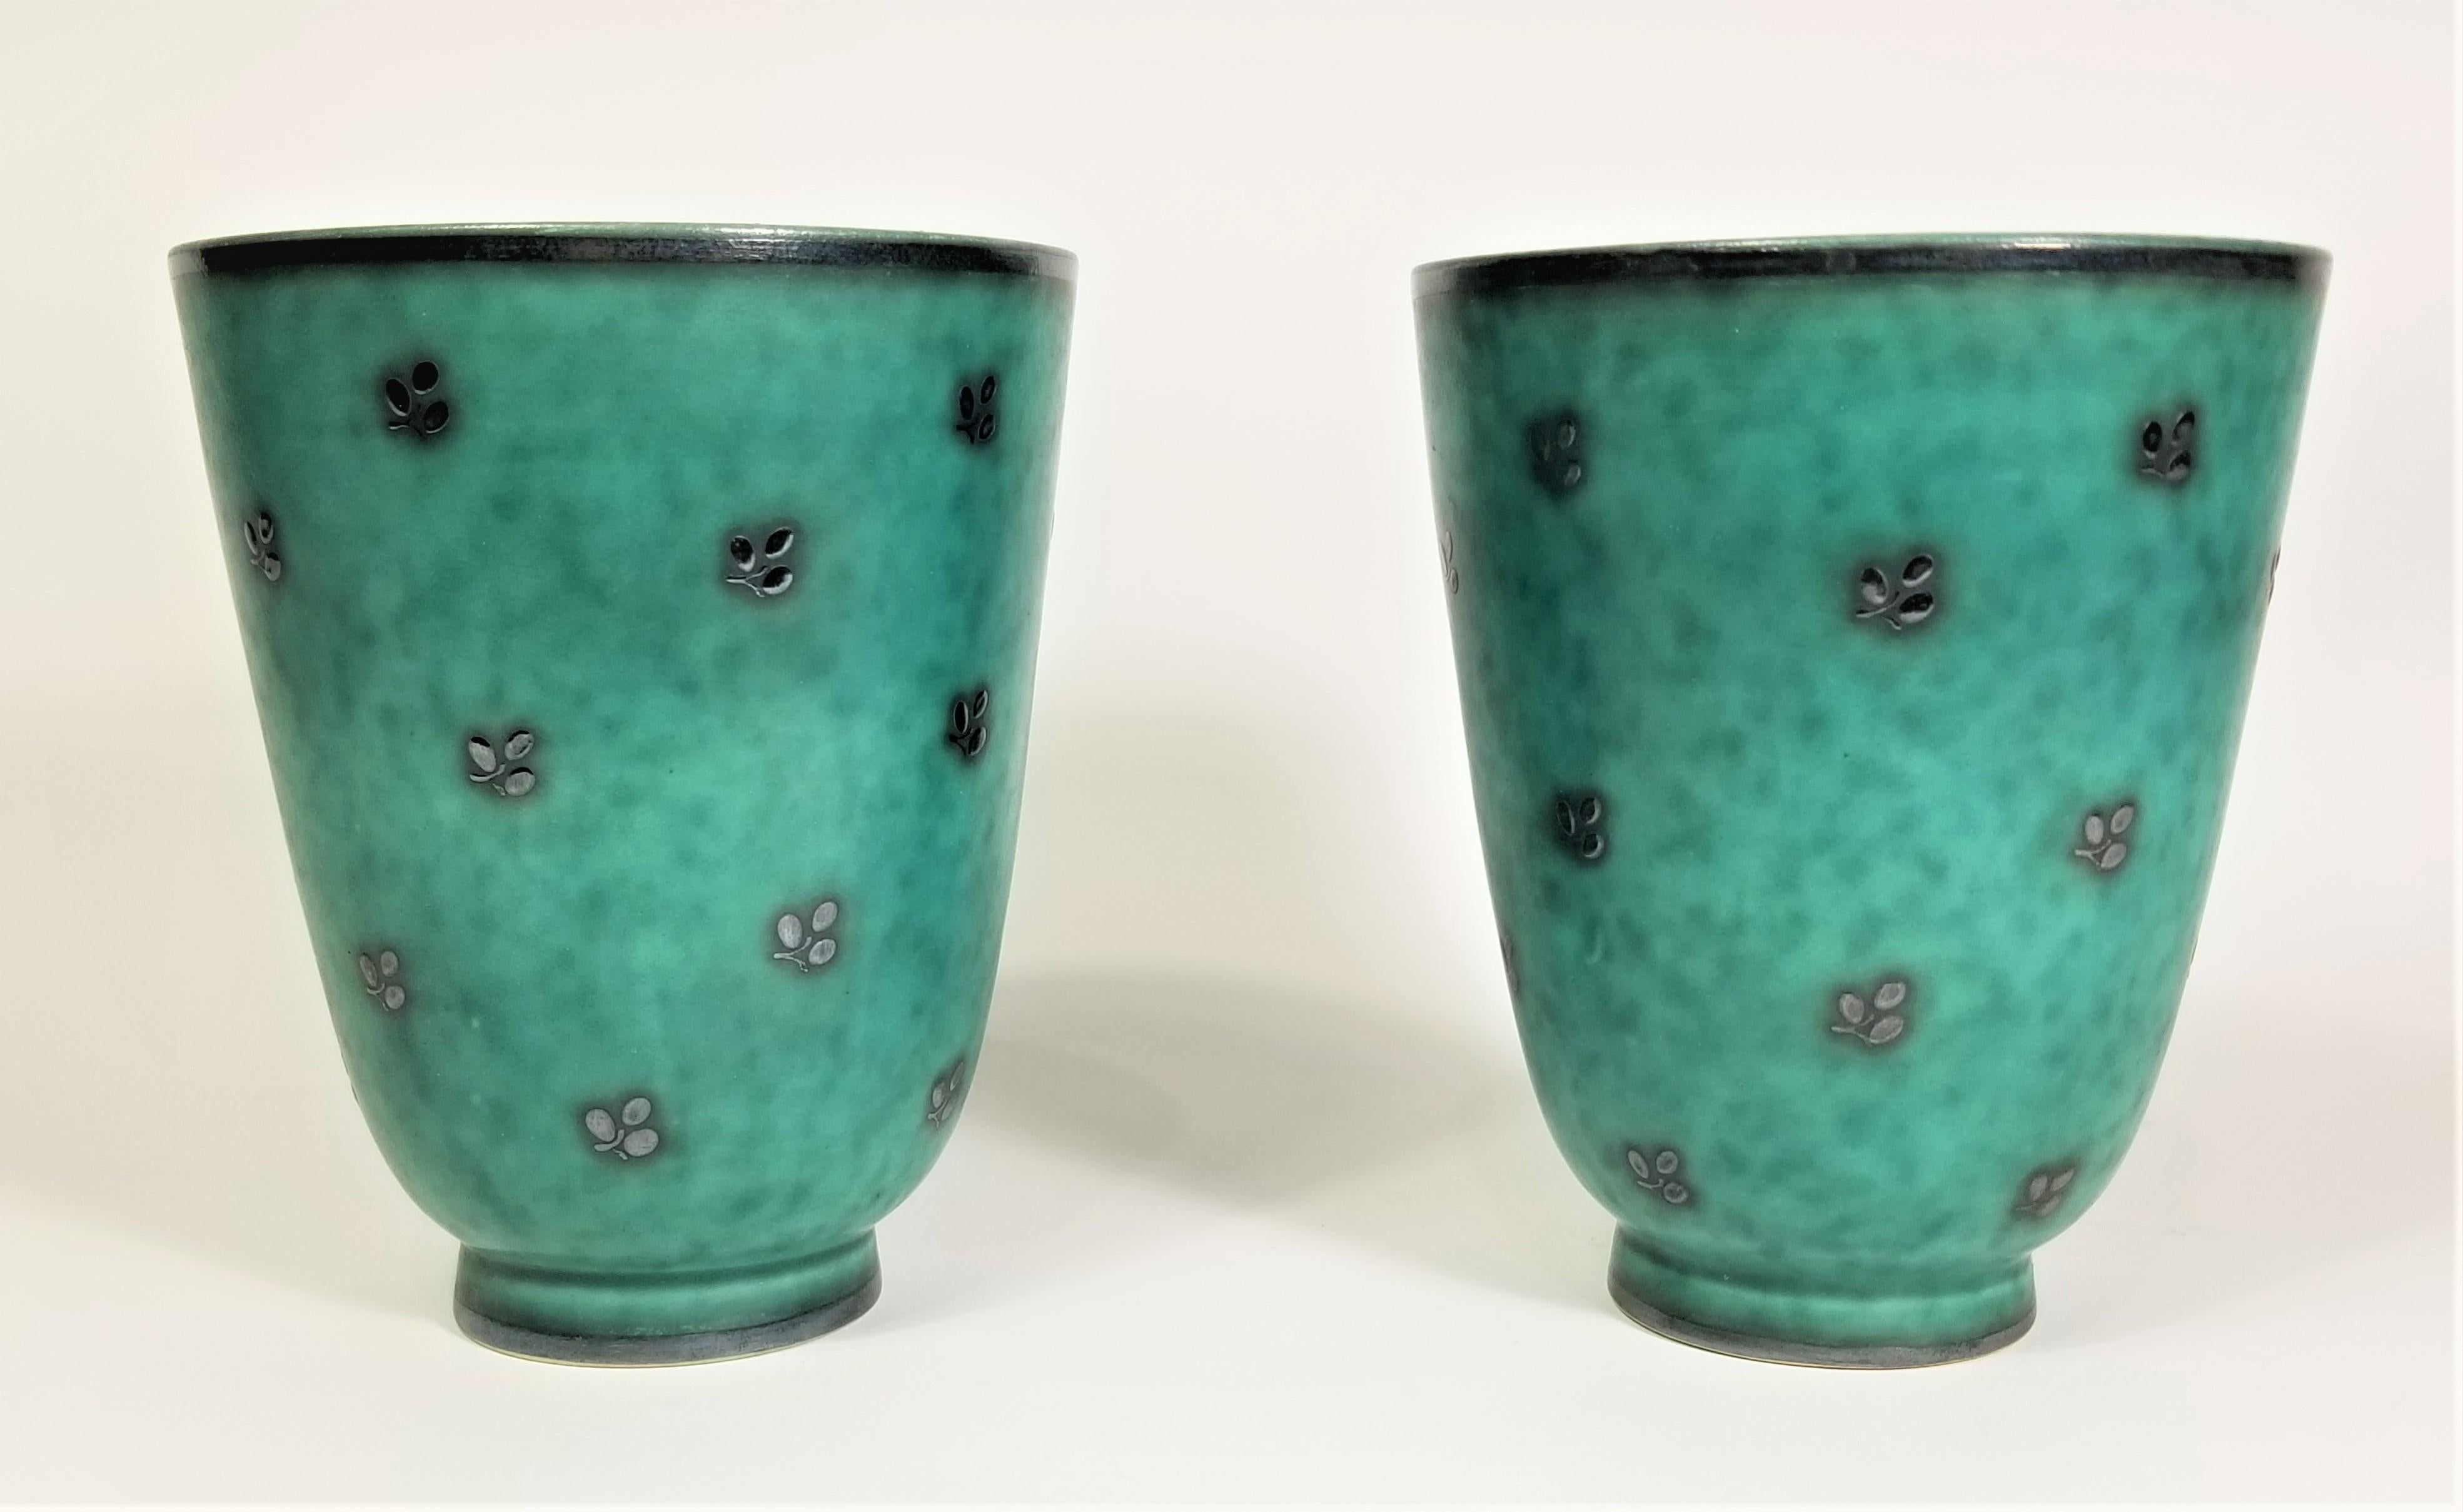 Pair of Art Deco 1930s Gustavsberg Argenta Sweden by Wilhelm Kage Vase or Vessel. Ceramic with Sterling Silver Overlay. All Markings on bottom. Excellent Condition. 

